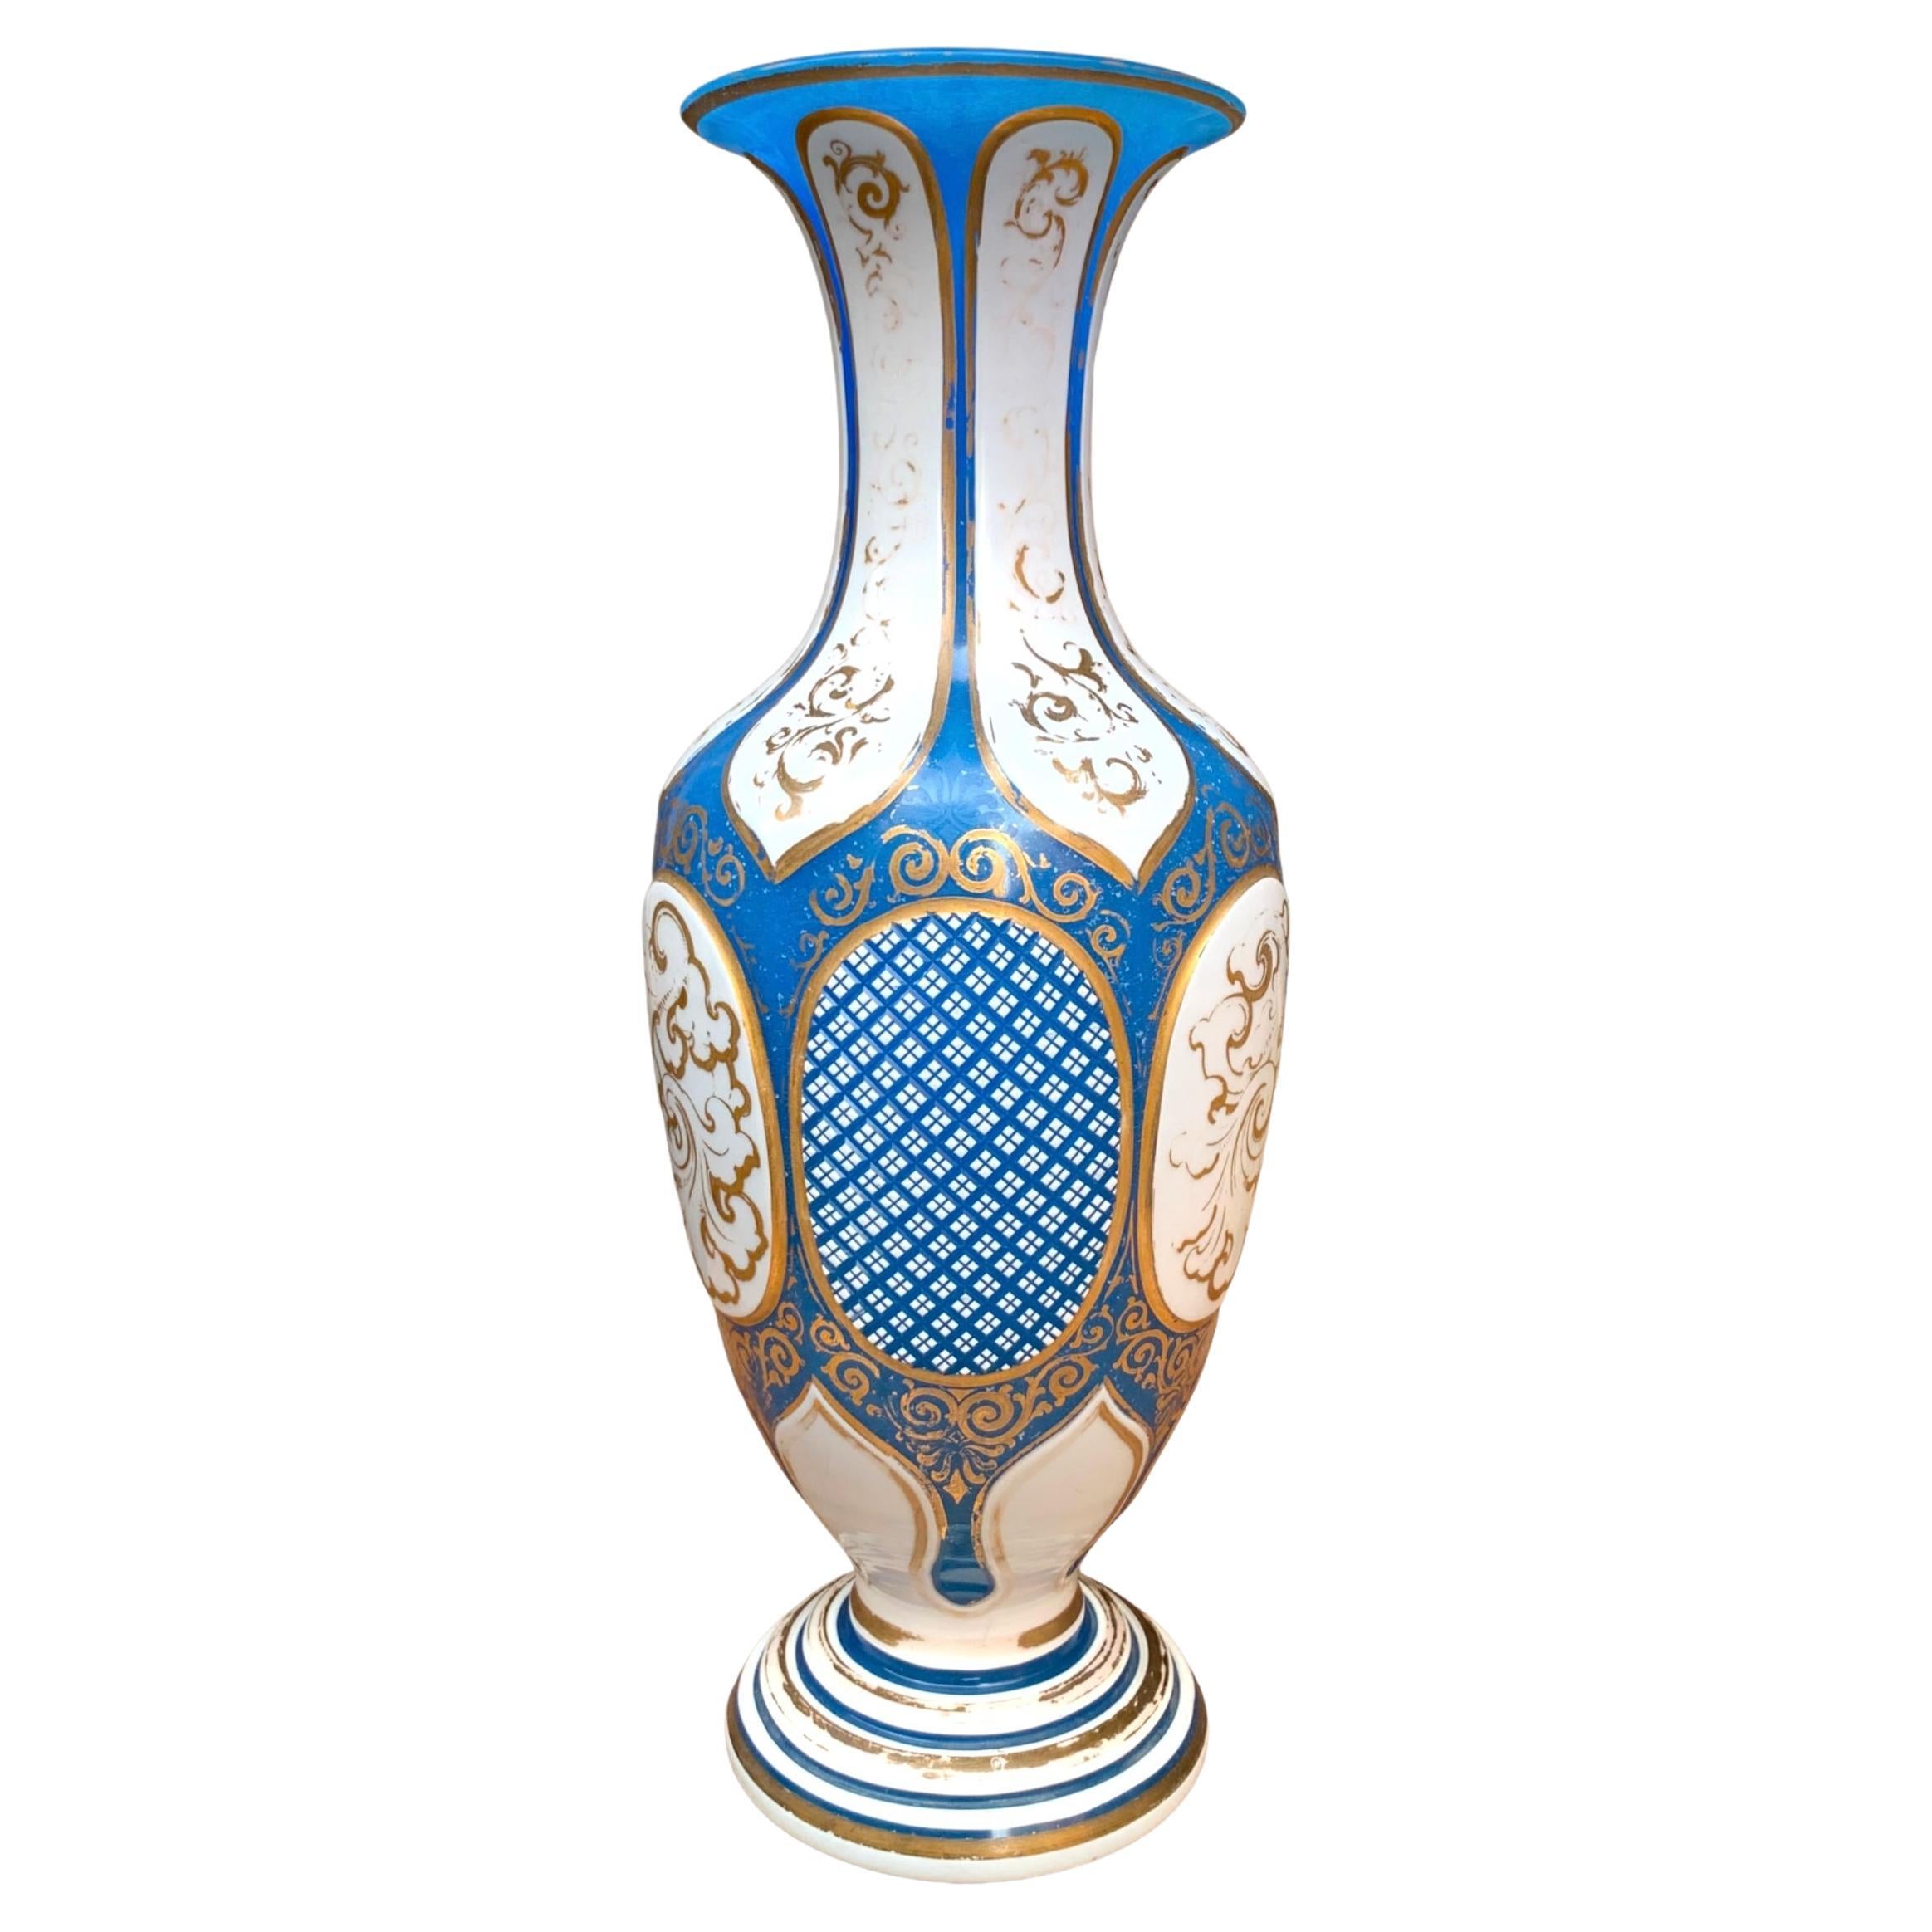 Opaline Alabaster glass vase with milky white opal glass overlay
Various Cut decorations to the glass all around the body
Gilded Enamel decorations on both the Blue and the White Layers
Bohemia, 19th Century.